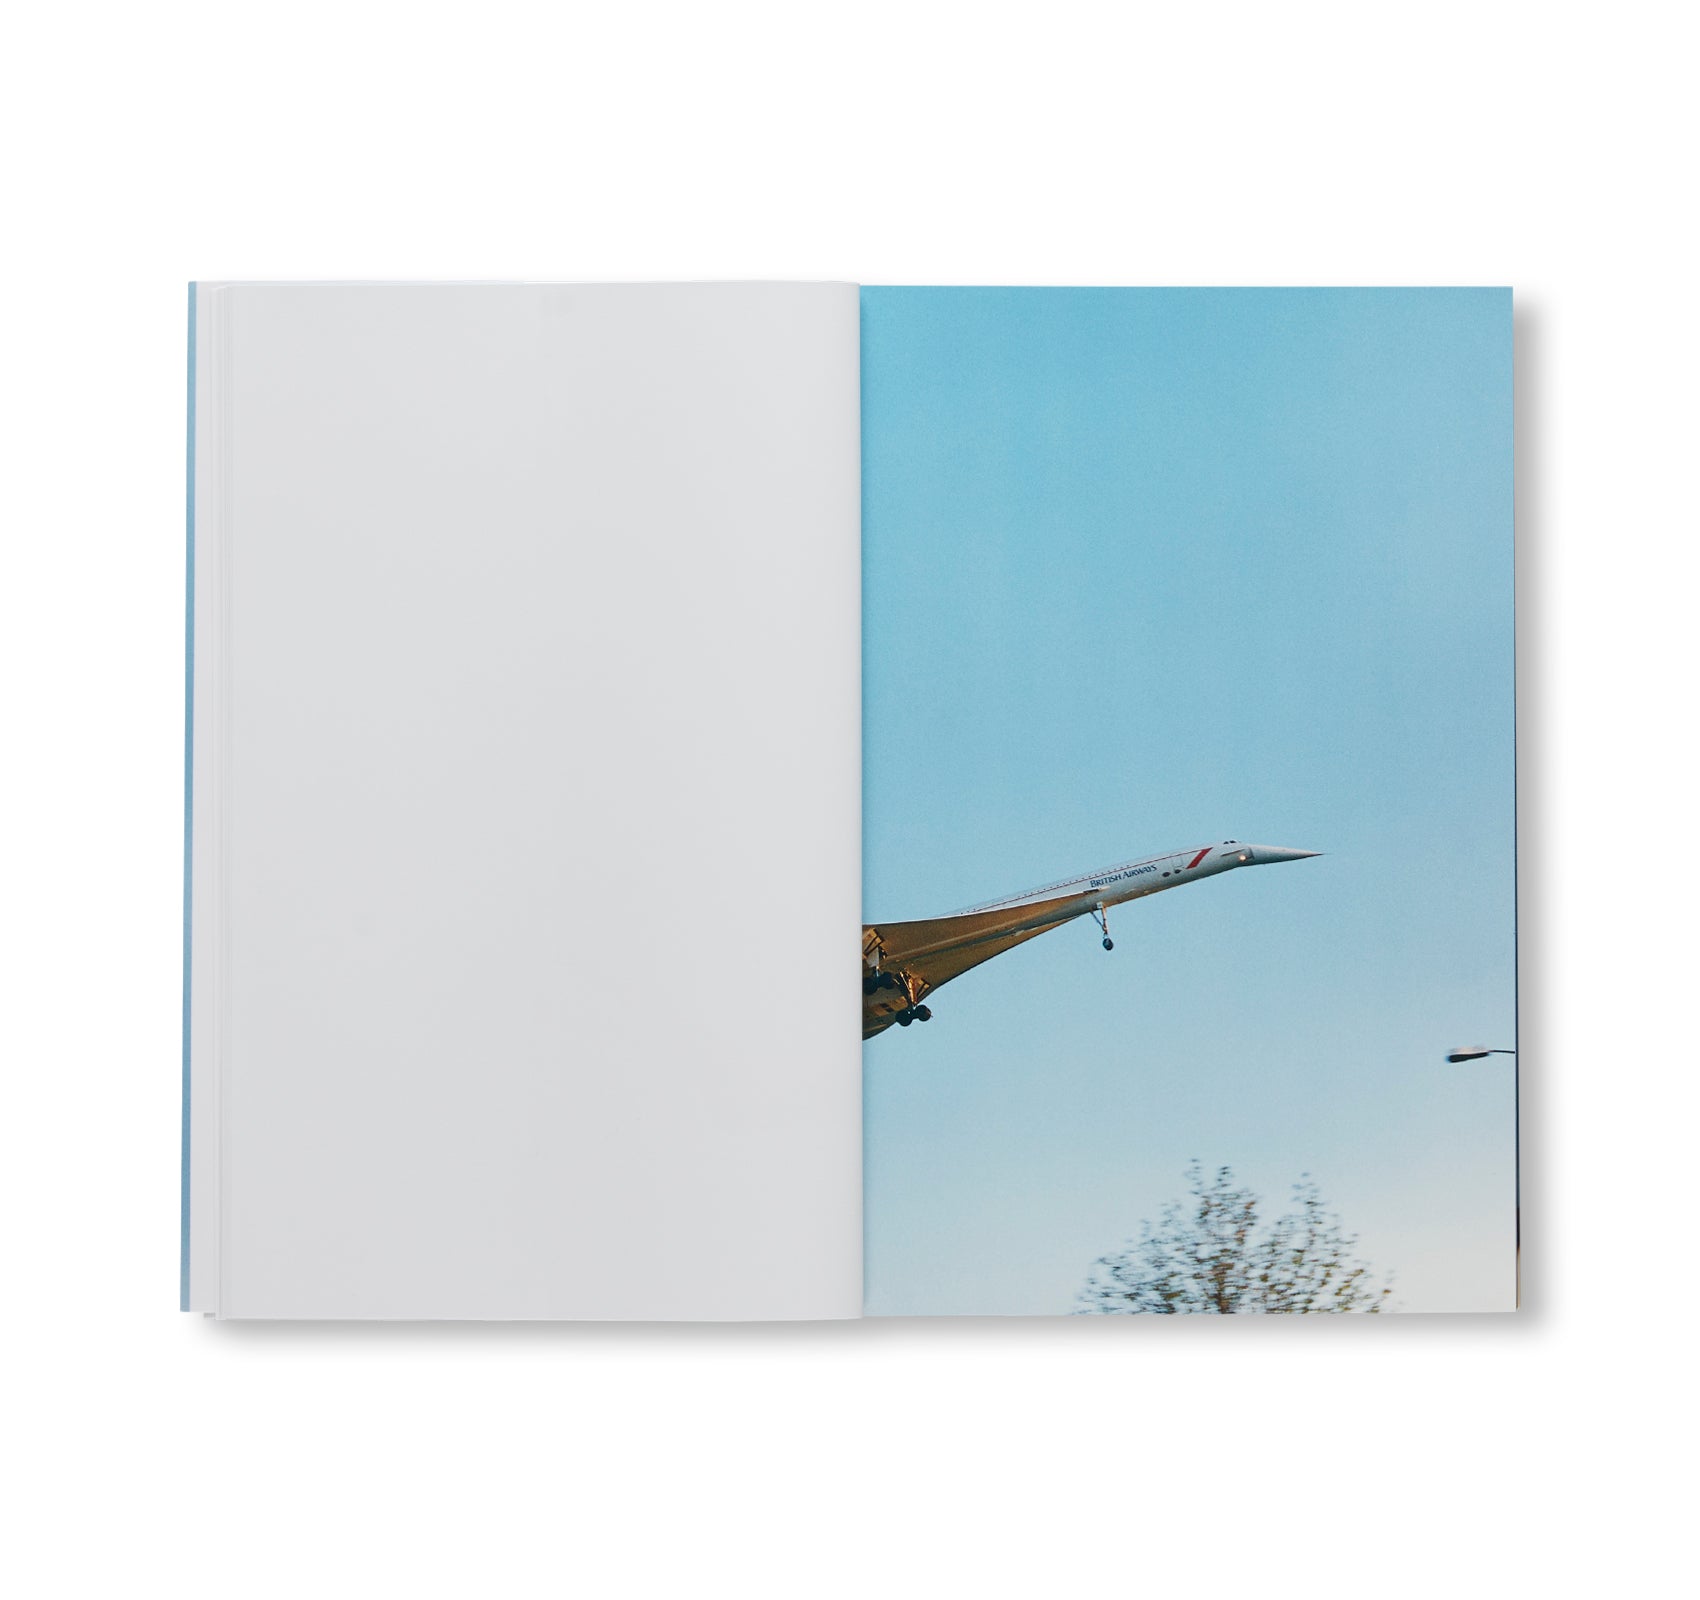 CONCORDE by Wolfgang Tillmans